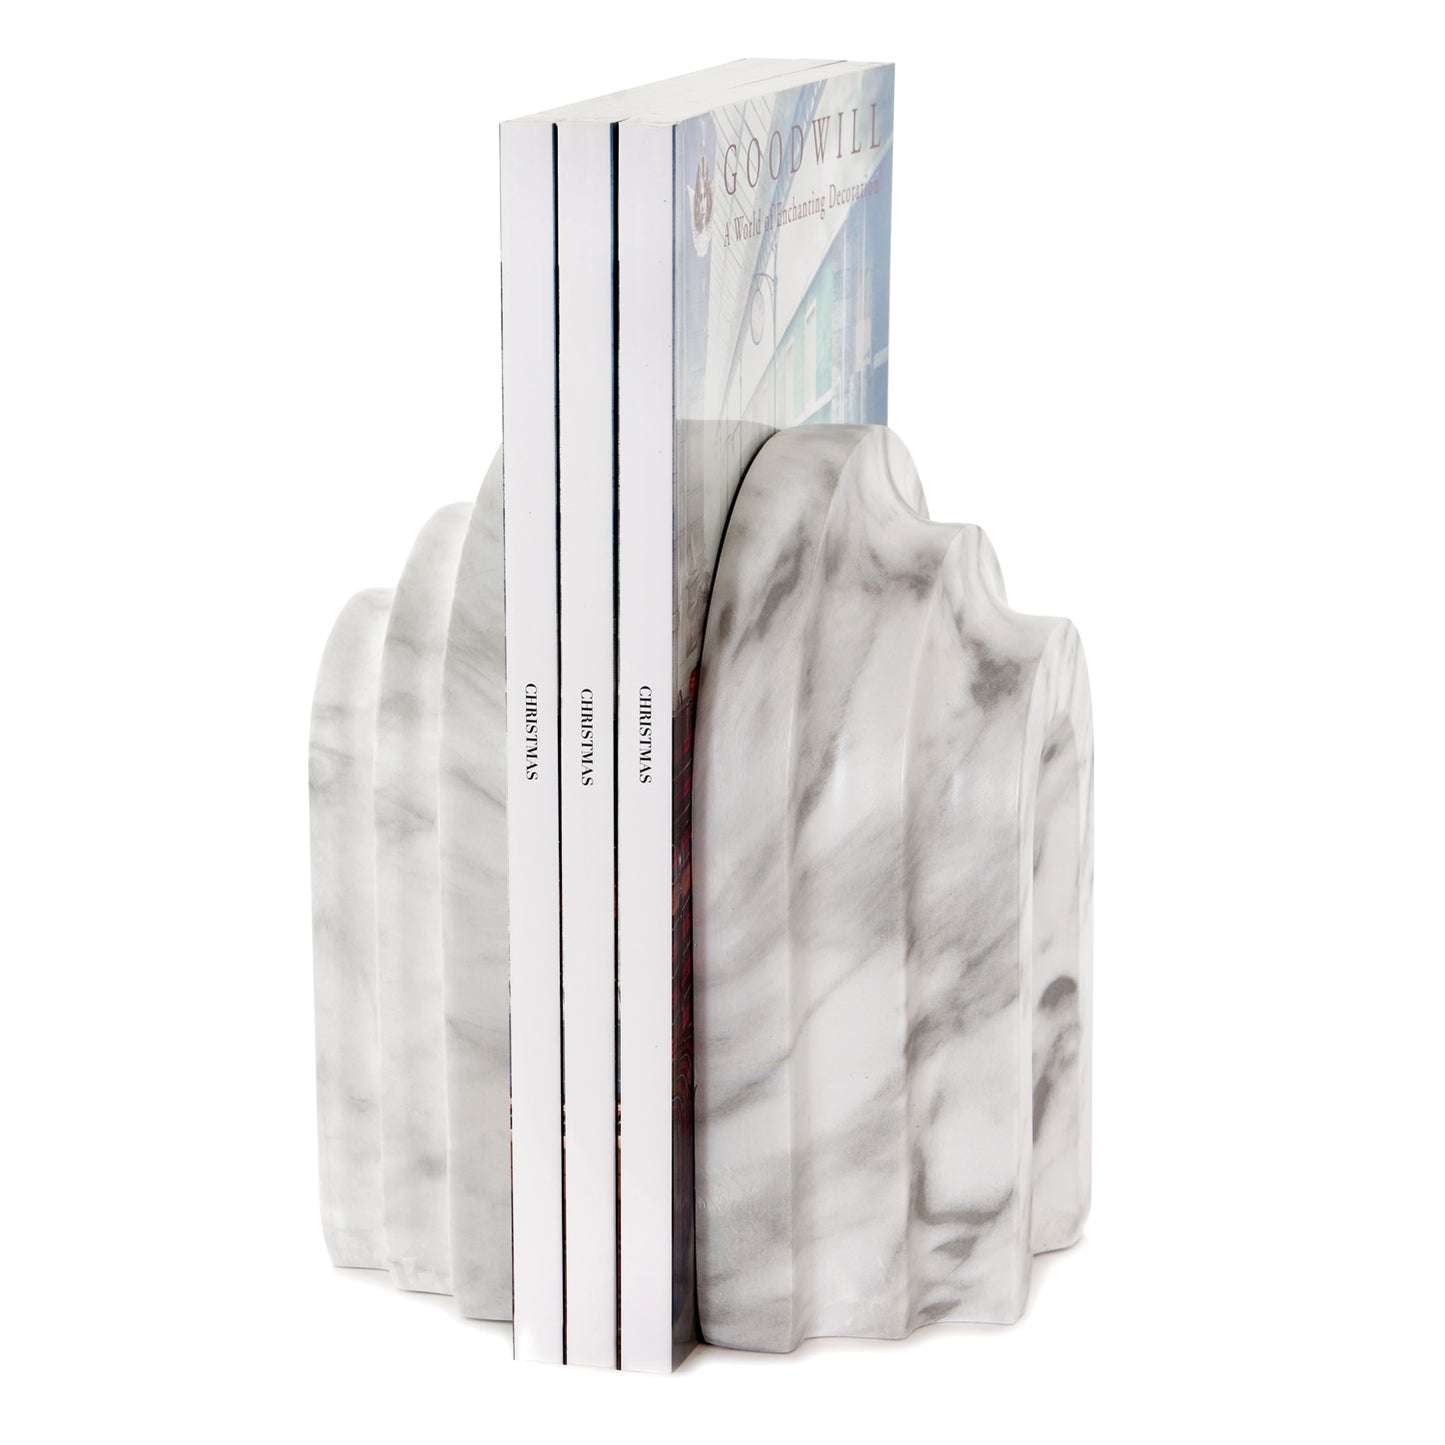 Goodwill Marble Look Bookends Two-tone White/Gray 20.5Cm, Set of 2